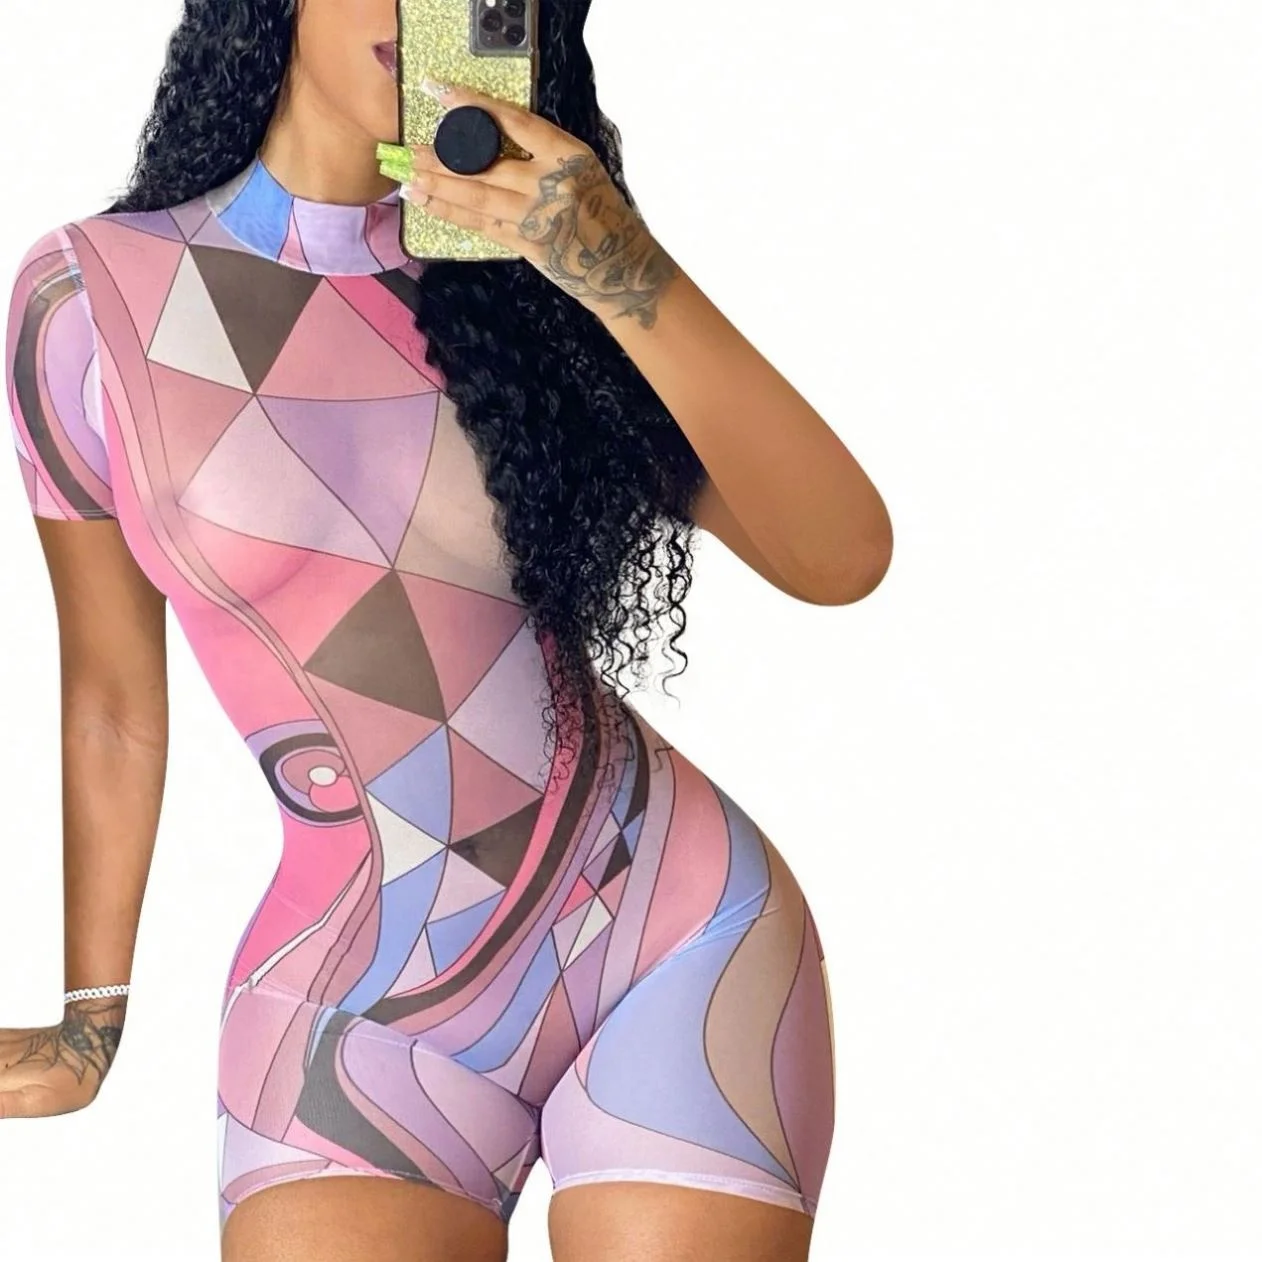 

New Style Print Tight Sexy Short Rompers Summer Short Sleeve Mesh Gauze Transparent Women Jumpsuit 2021, As picture or customized make